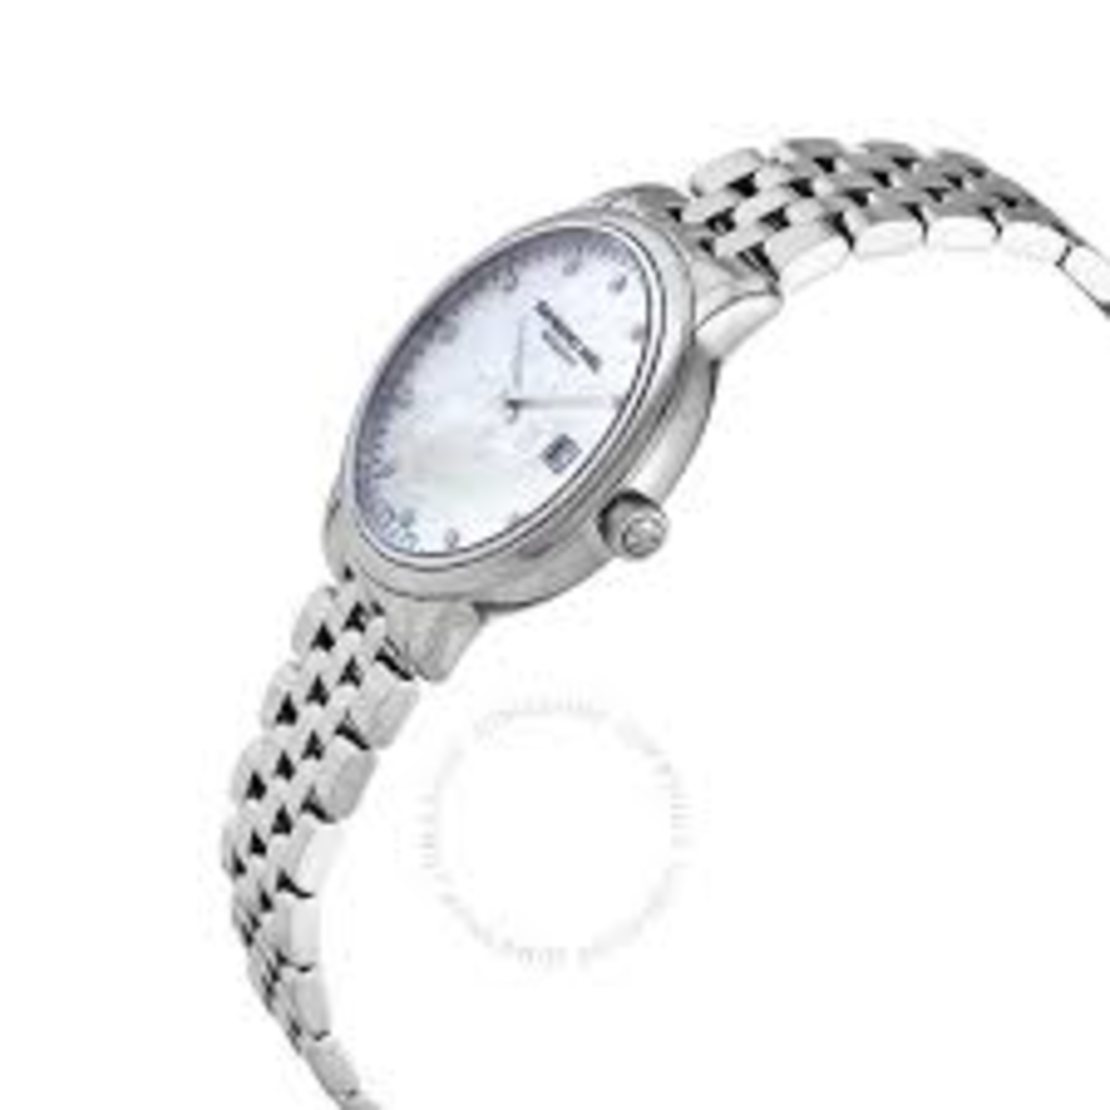 Toccata Ladies White Mother-of-Pearl Diamond 5985-ST-97081